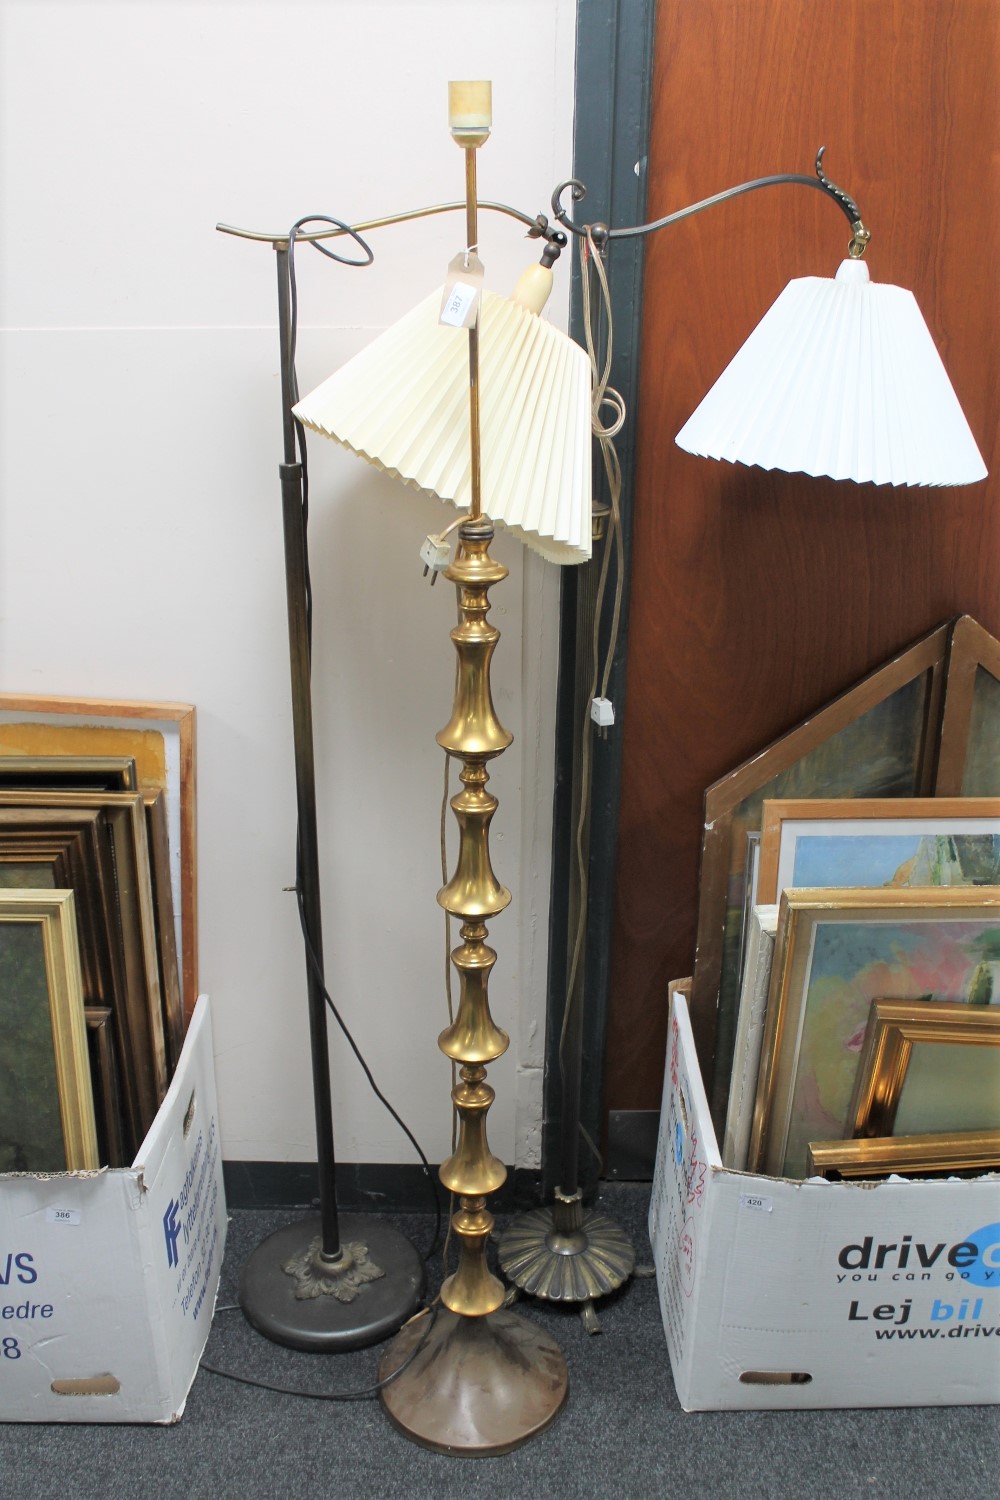 Three mid twentieth century continental floor lamps (two with shades)